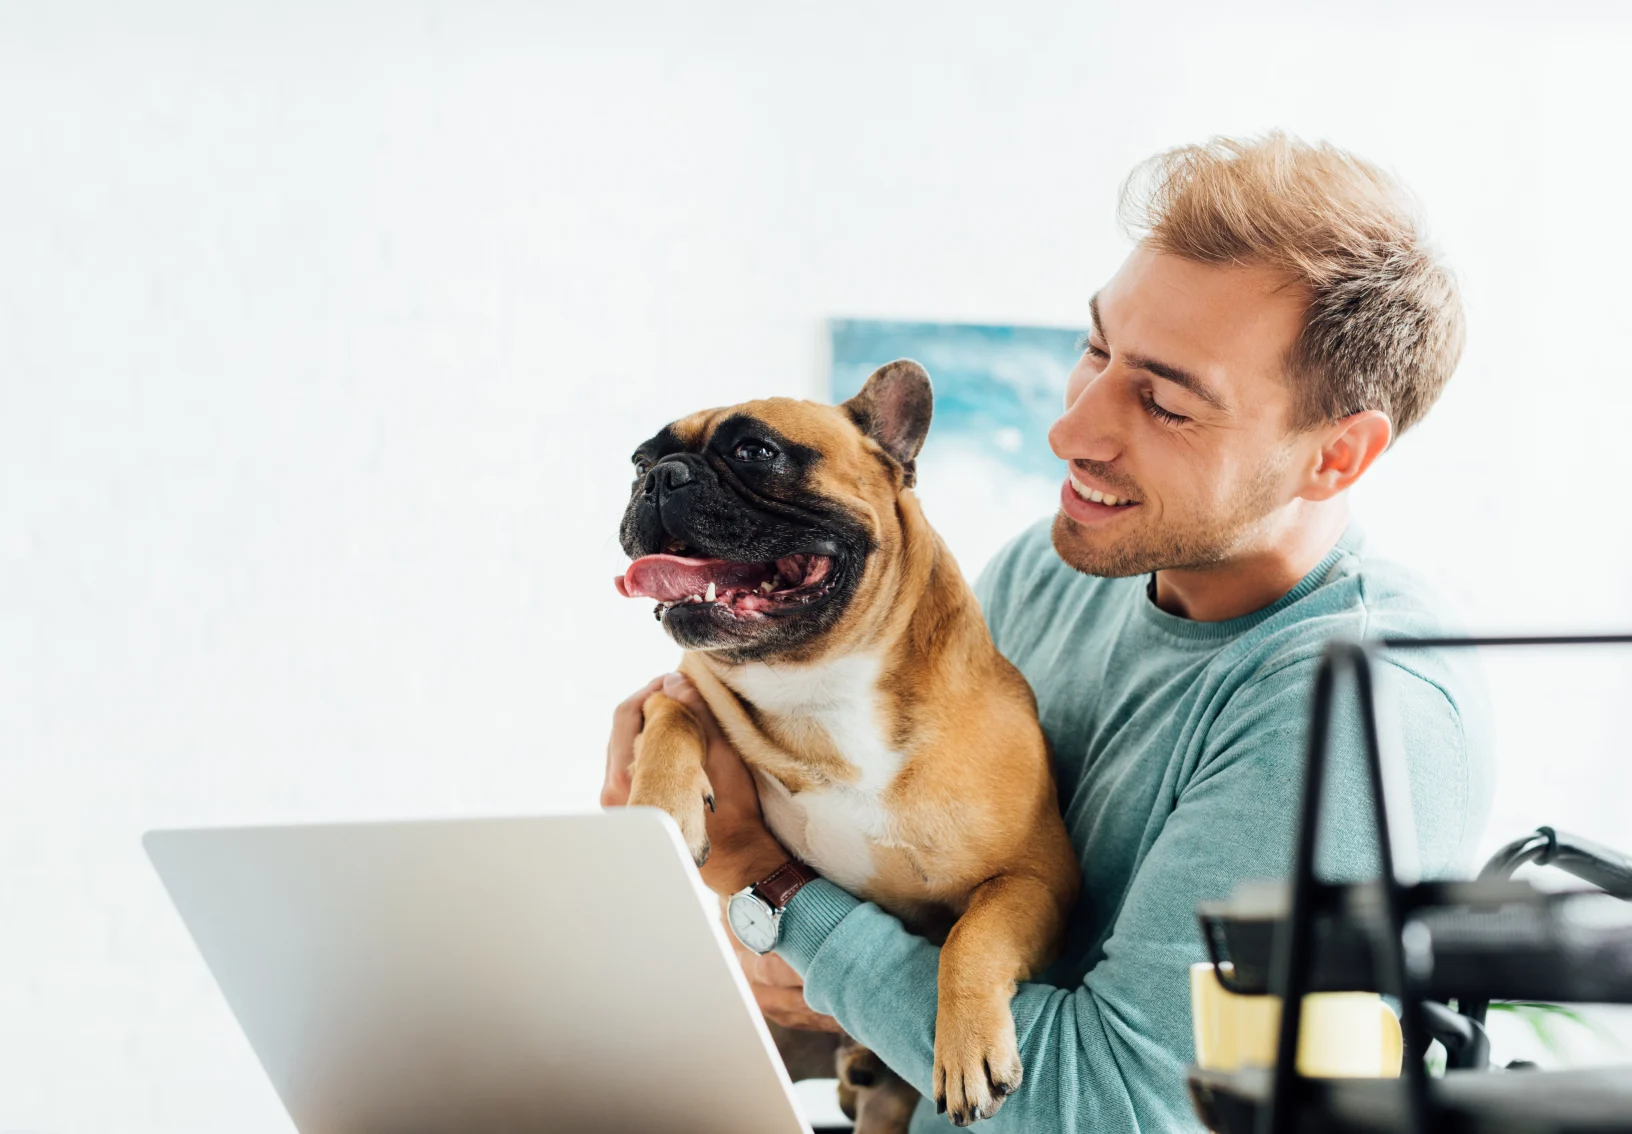 Man holding dog up in front of laptop